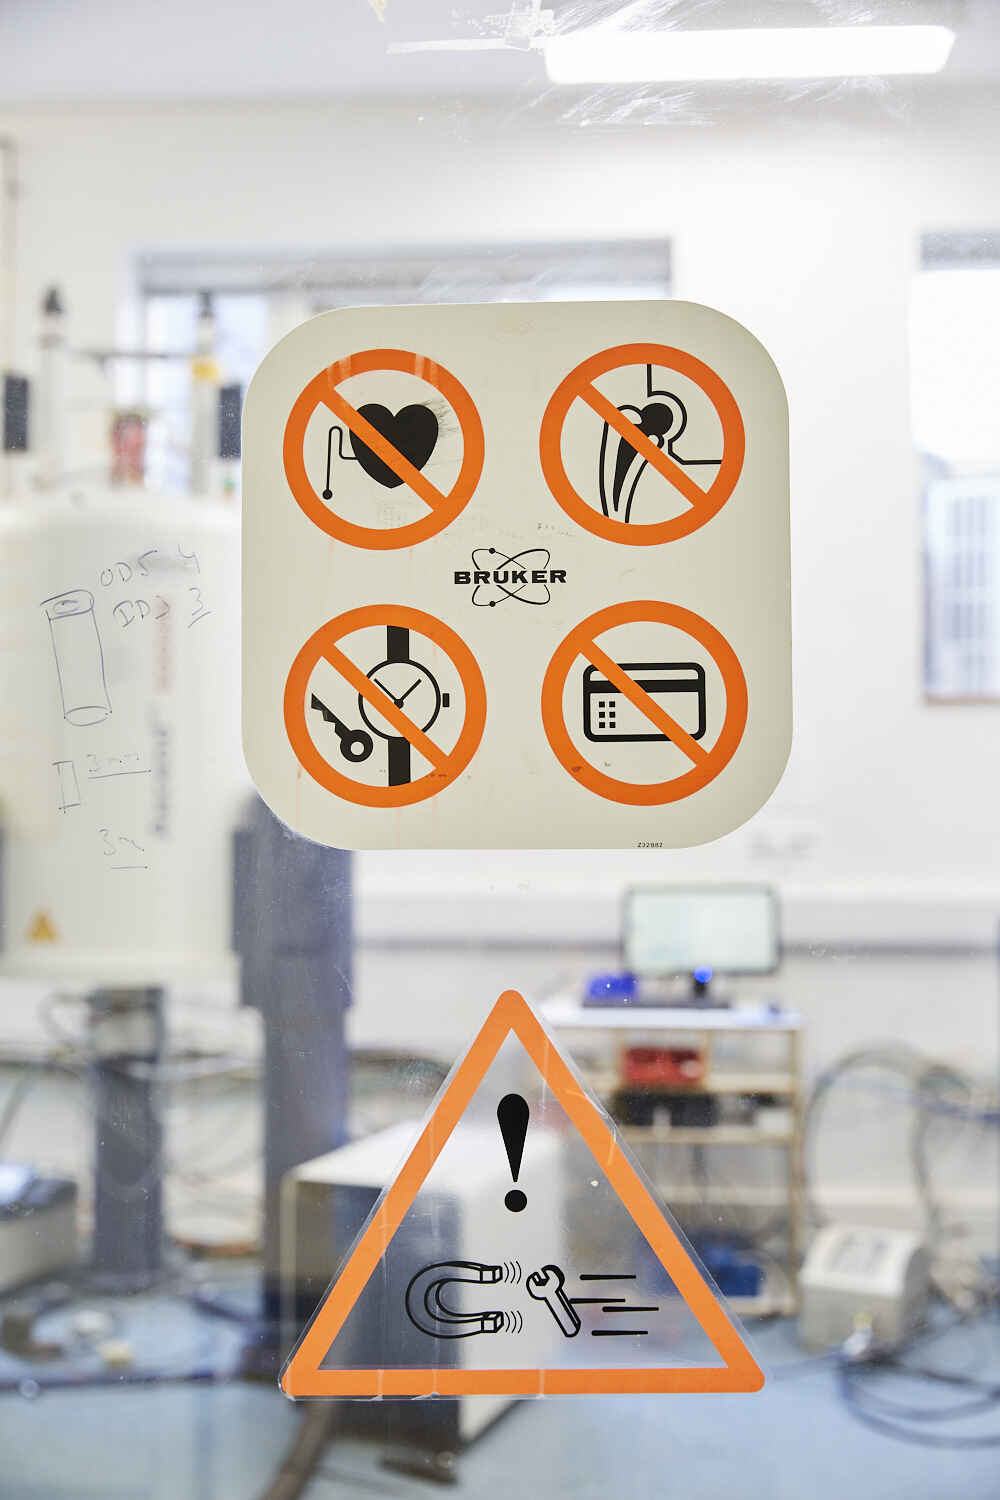 Warning signs on the door of the NMR laboratory. In the strong magnetic field of the NMR spectrometer, heart pace makers can stop functioning. Entrance with artificial joints is also forbidden. Particularly dangerous are metal objects attracted by the magnets, which could injure people and destroy the magnets. Credit cards could also lose the information they store magnetically.